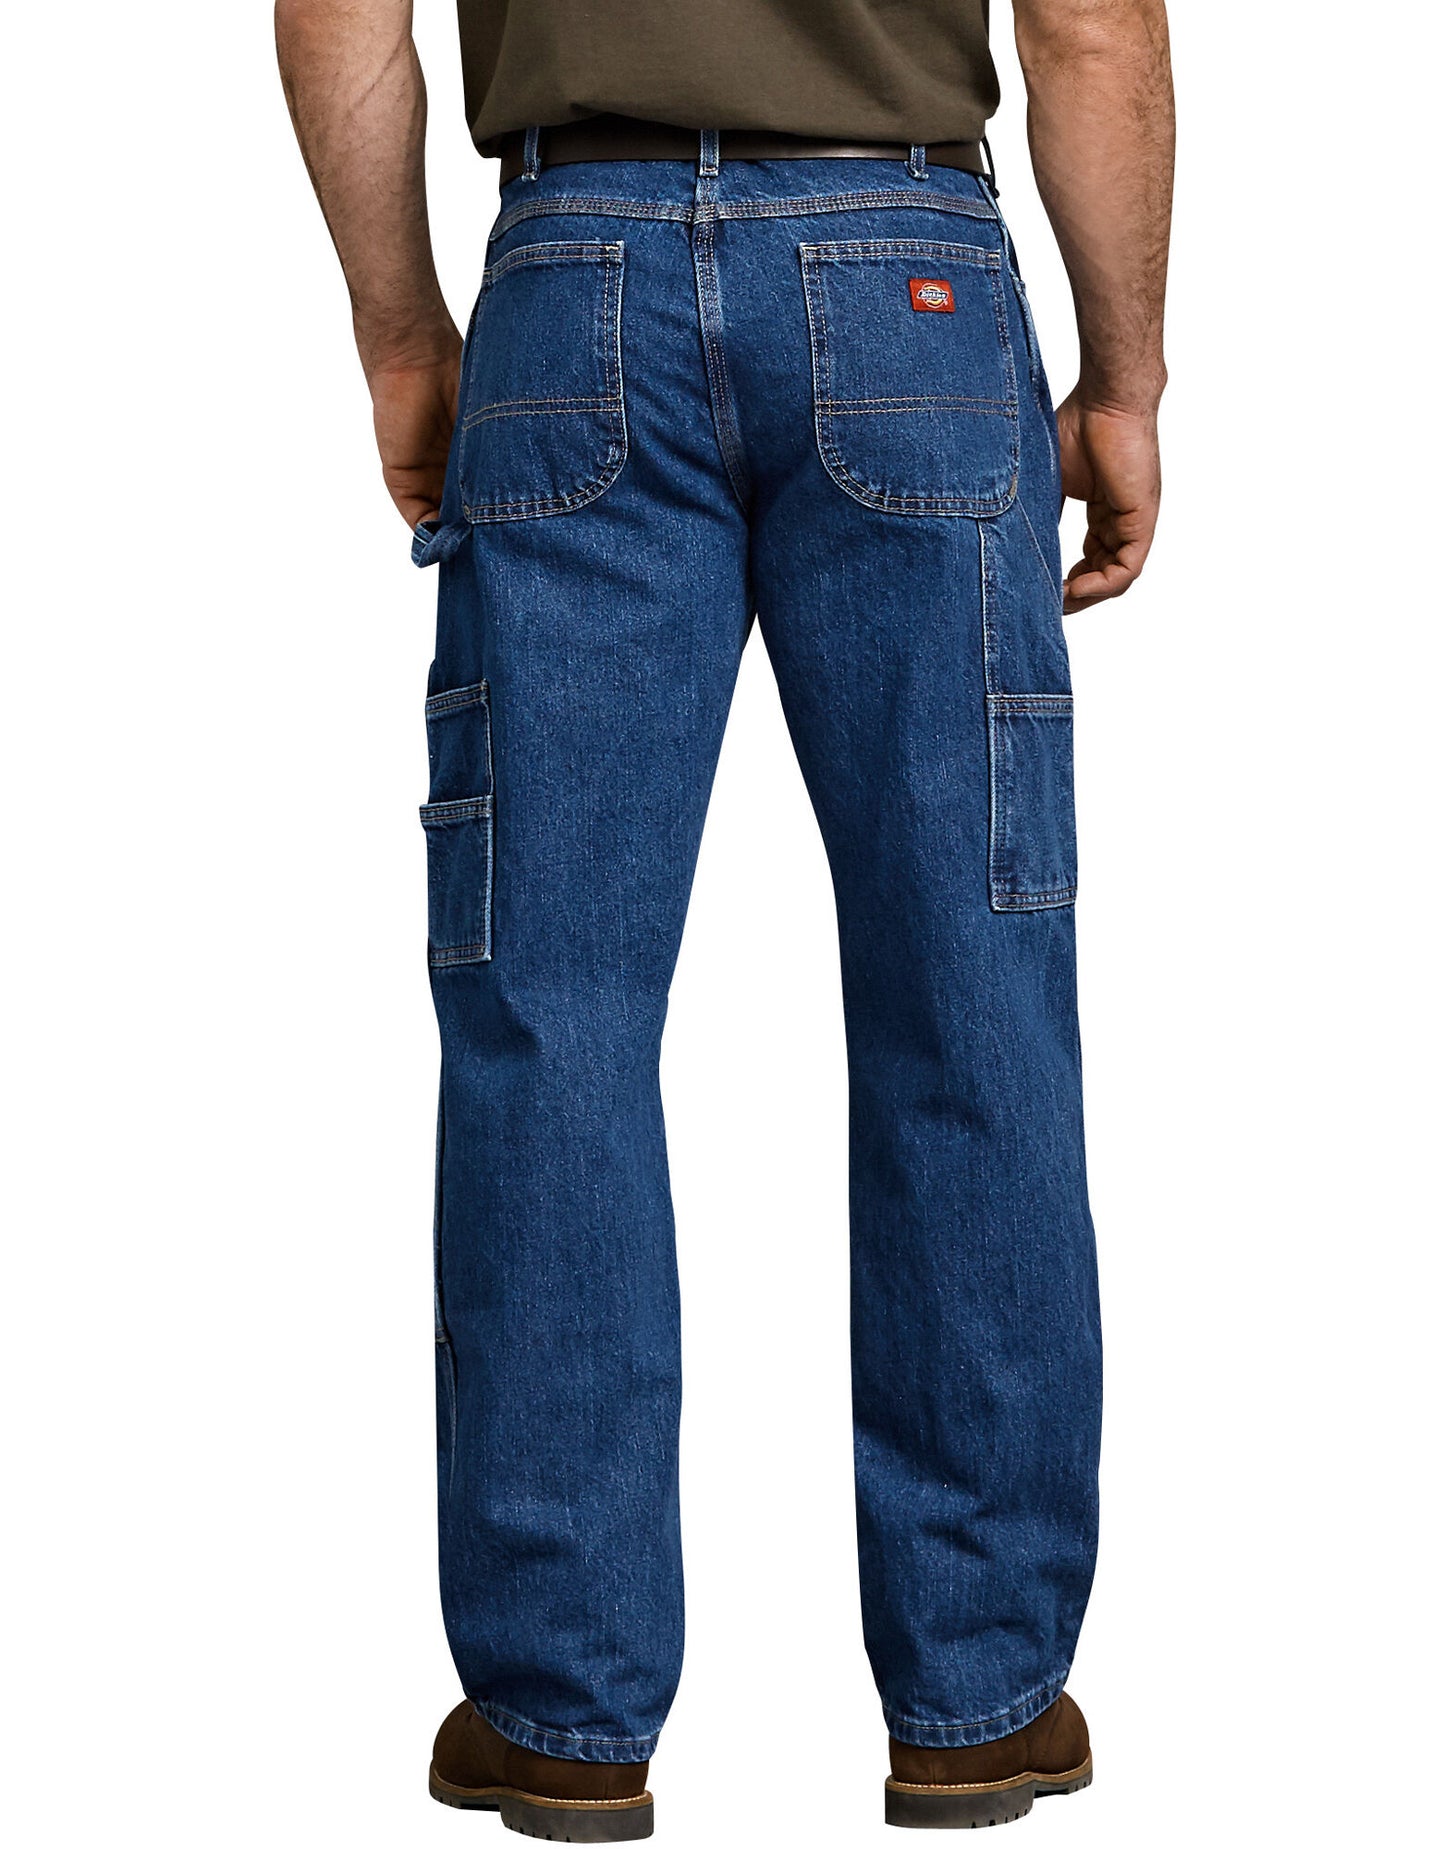 Relaxed Fit Double Knee Carpenter Denim Jeans